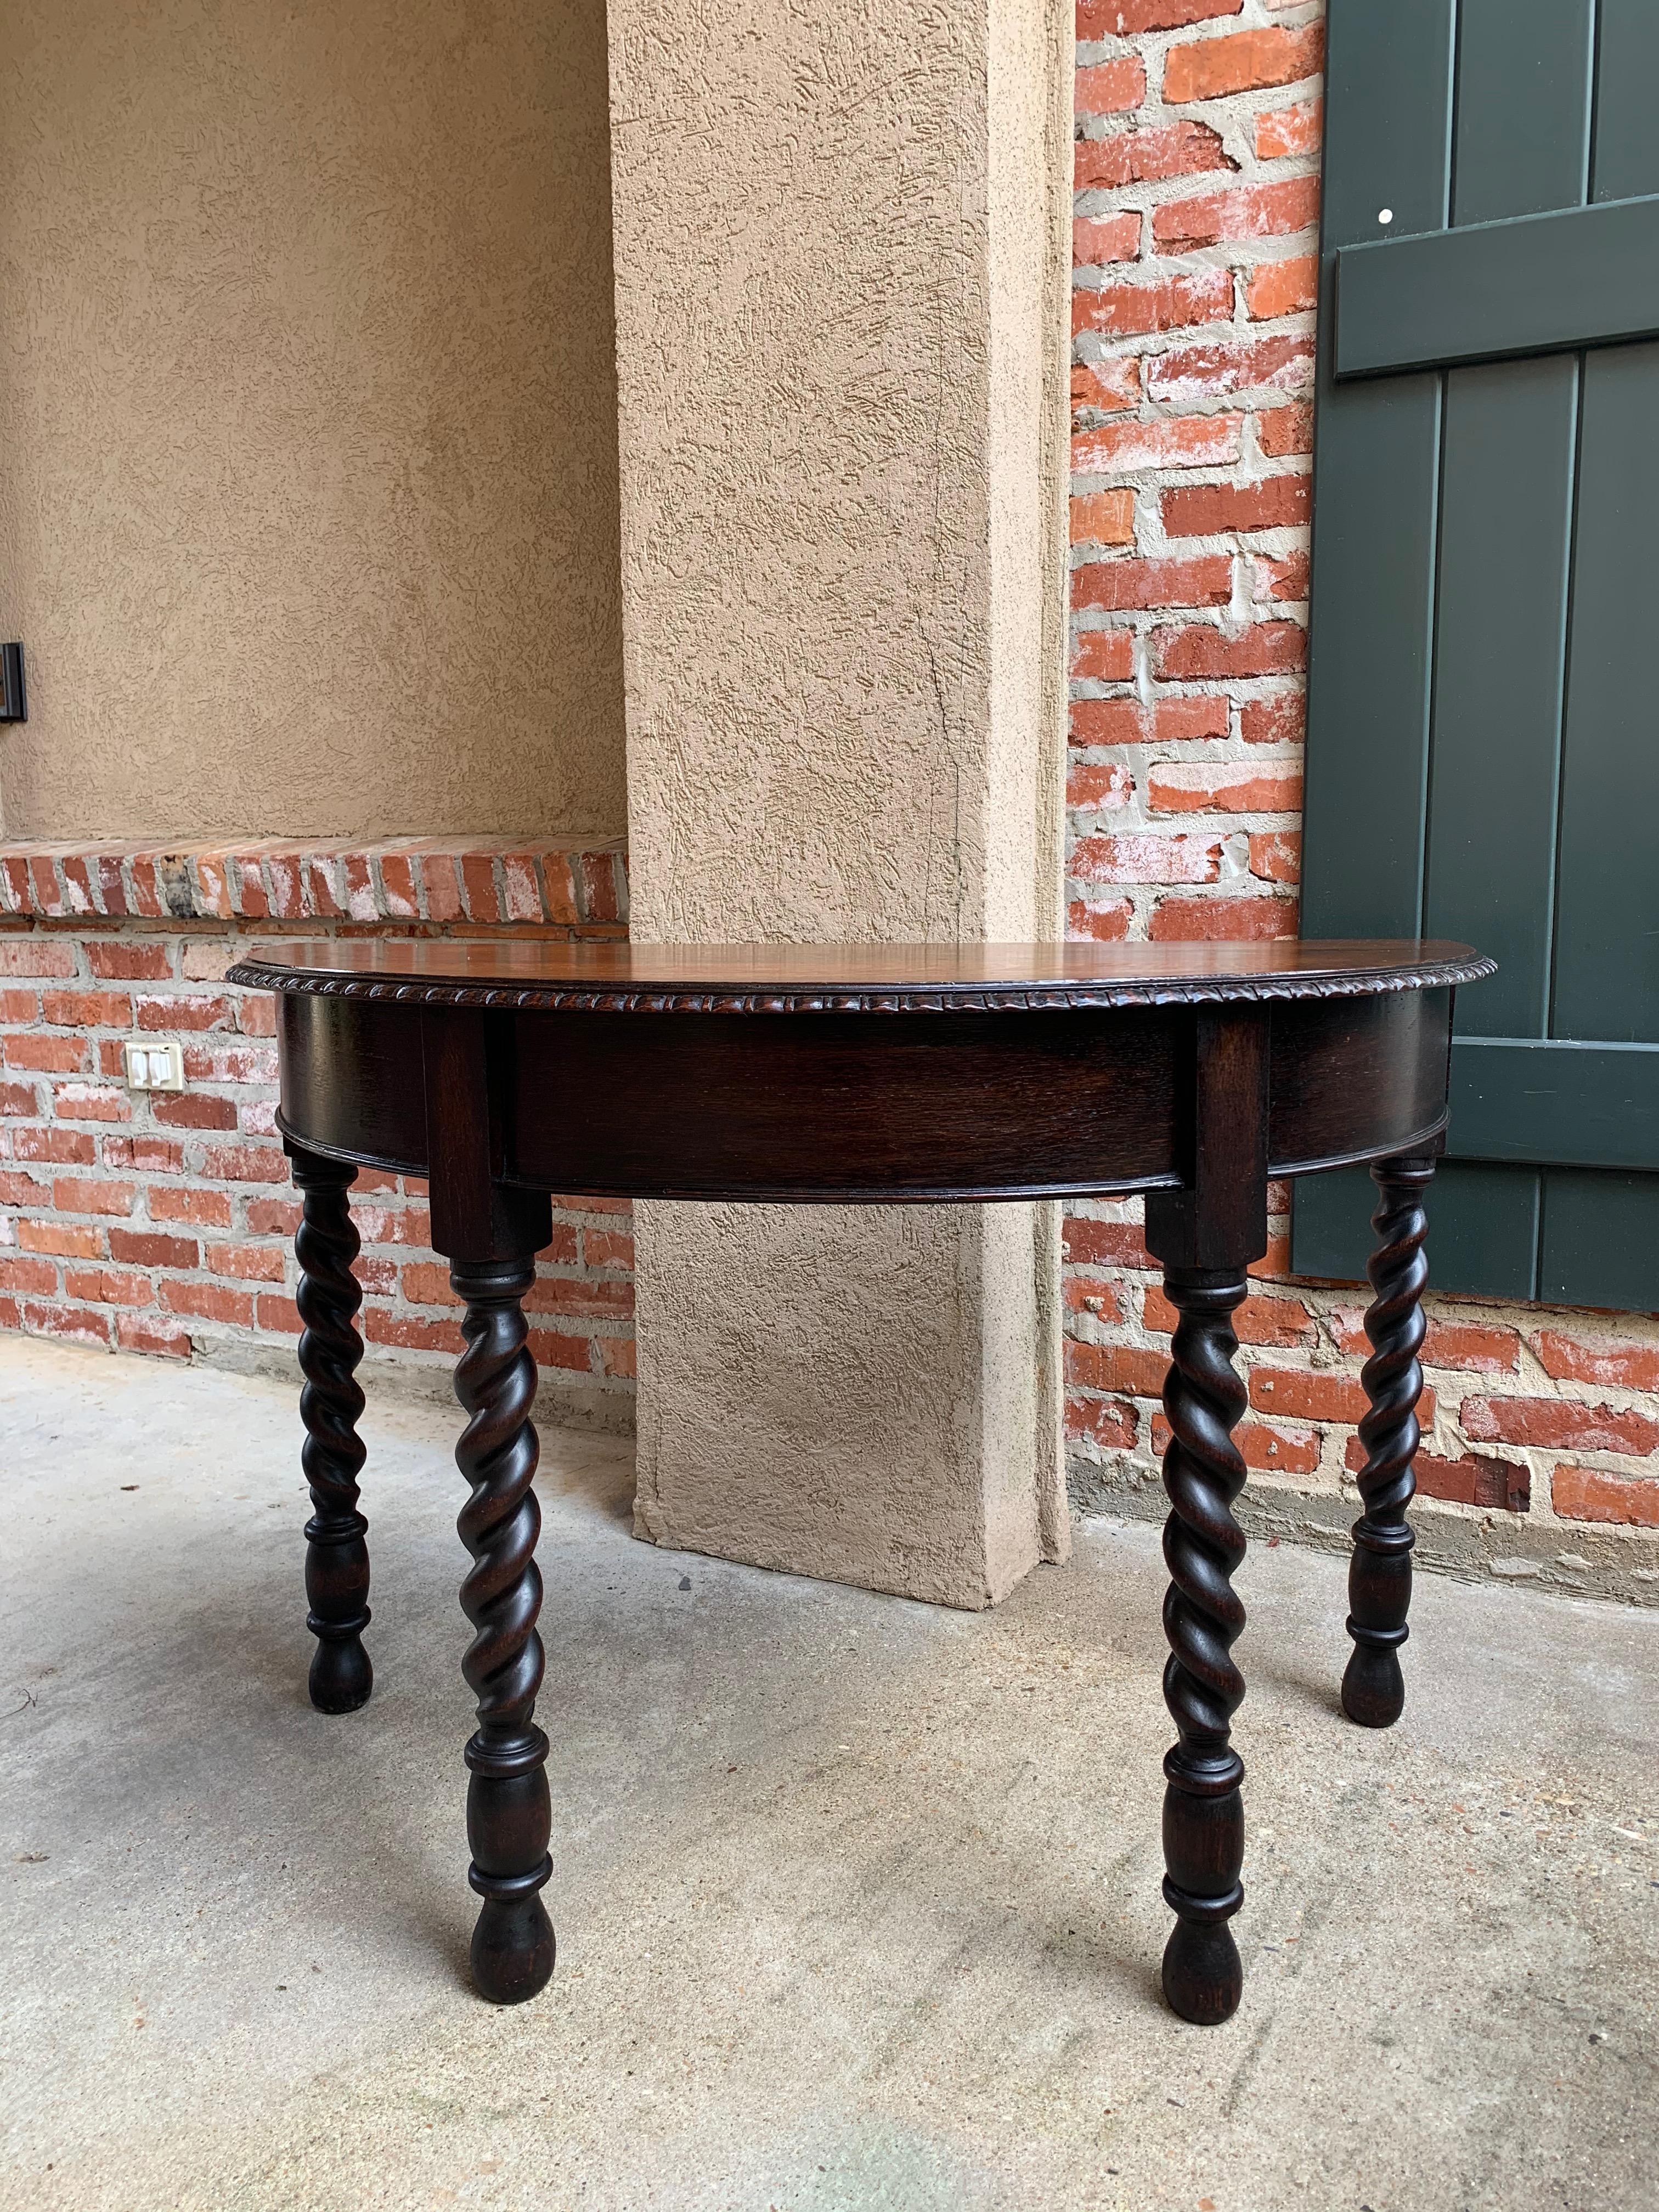 Direct from England, a beautiful (and very unusual) antique English demilune or “half moon” sofa/foyer table!!
~Classic British tiger oak grain on the top, with carved beveled edges~
~Large barley twist turned legs, so elegant and